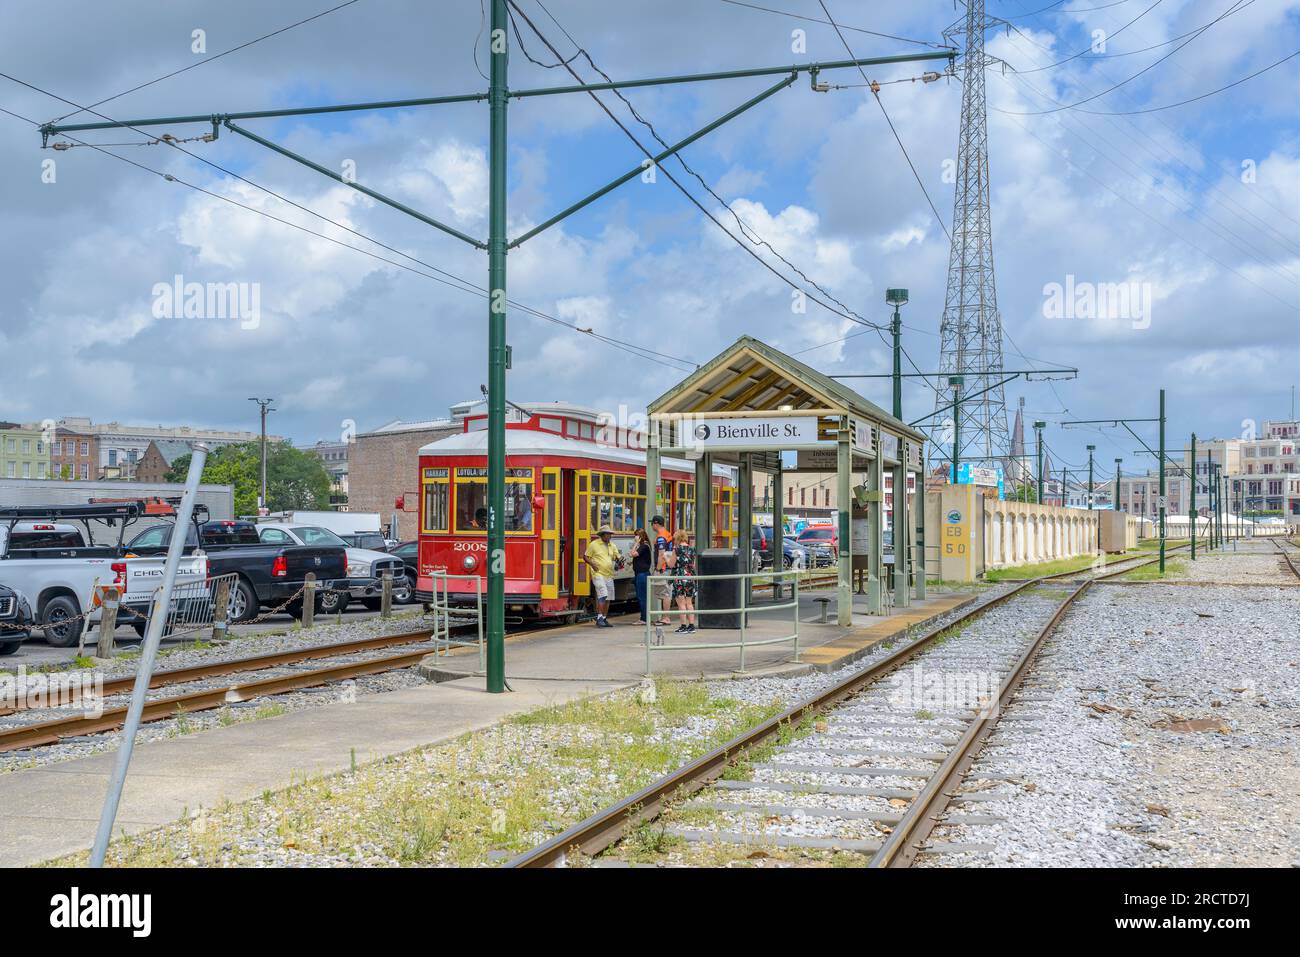 NEW ORLEANS, LA, USA - APRIL 24, 2022: Loyola-Union Passenger Terminal Line at the Bienville Street Stop at the edge of the French Quarter with people Stock Photo